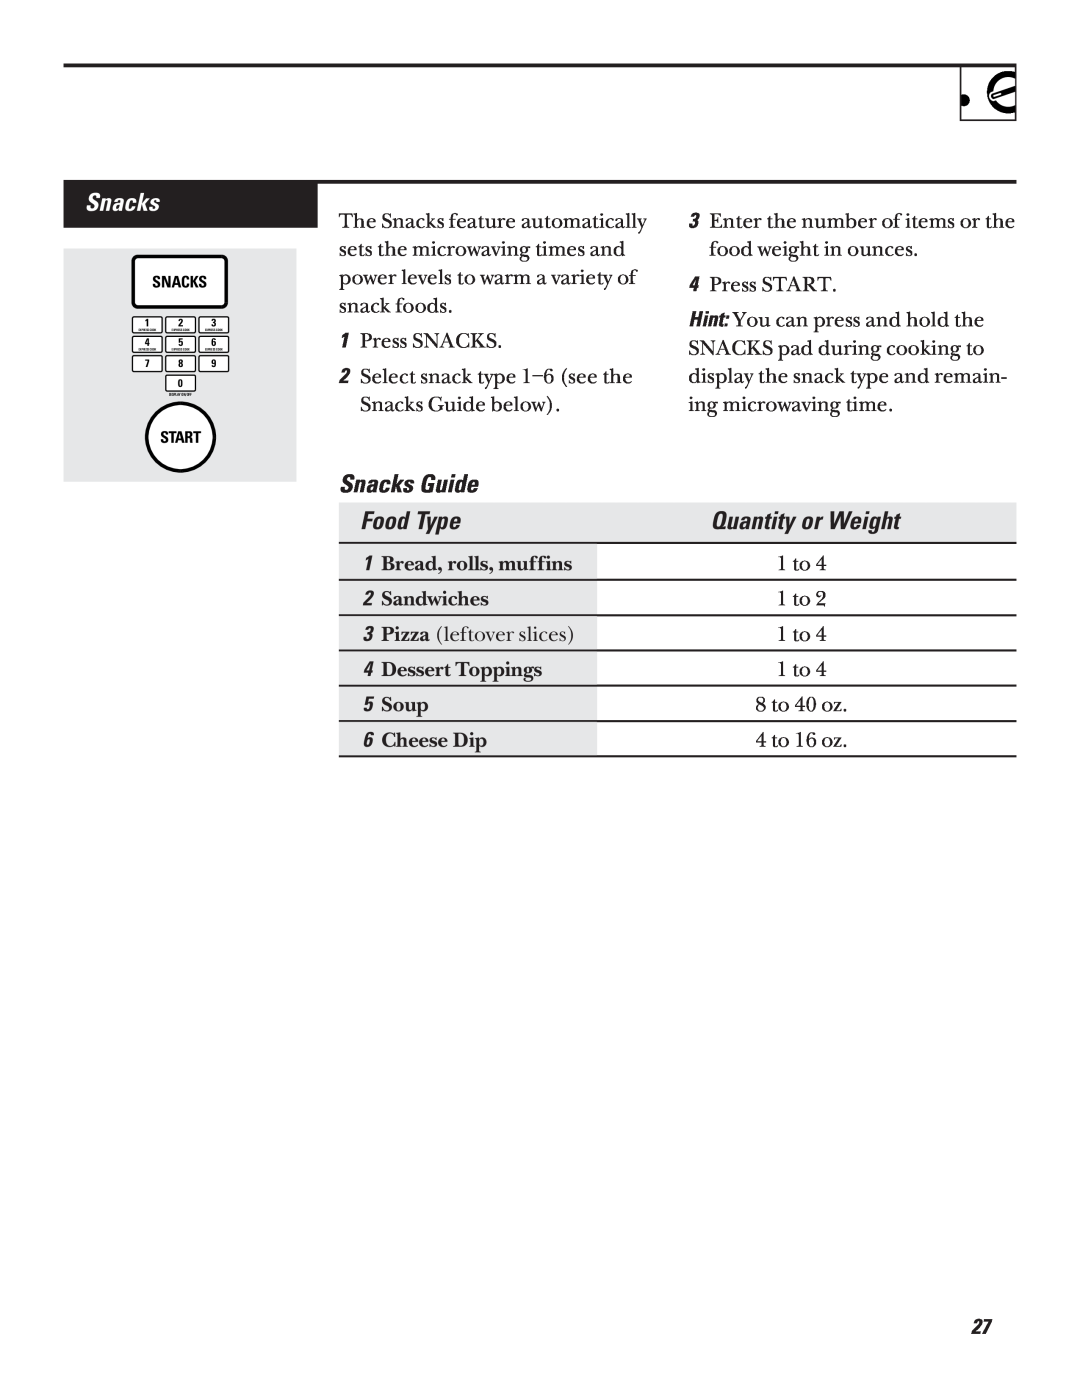 GE JVM1320 warranty Snacks Guide, Quantity or Weight, Food Type 